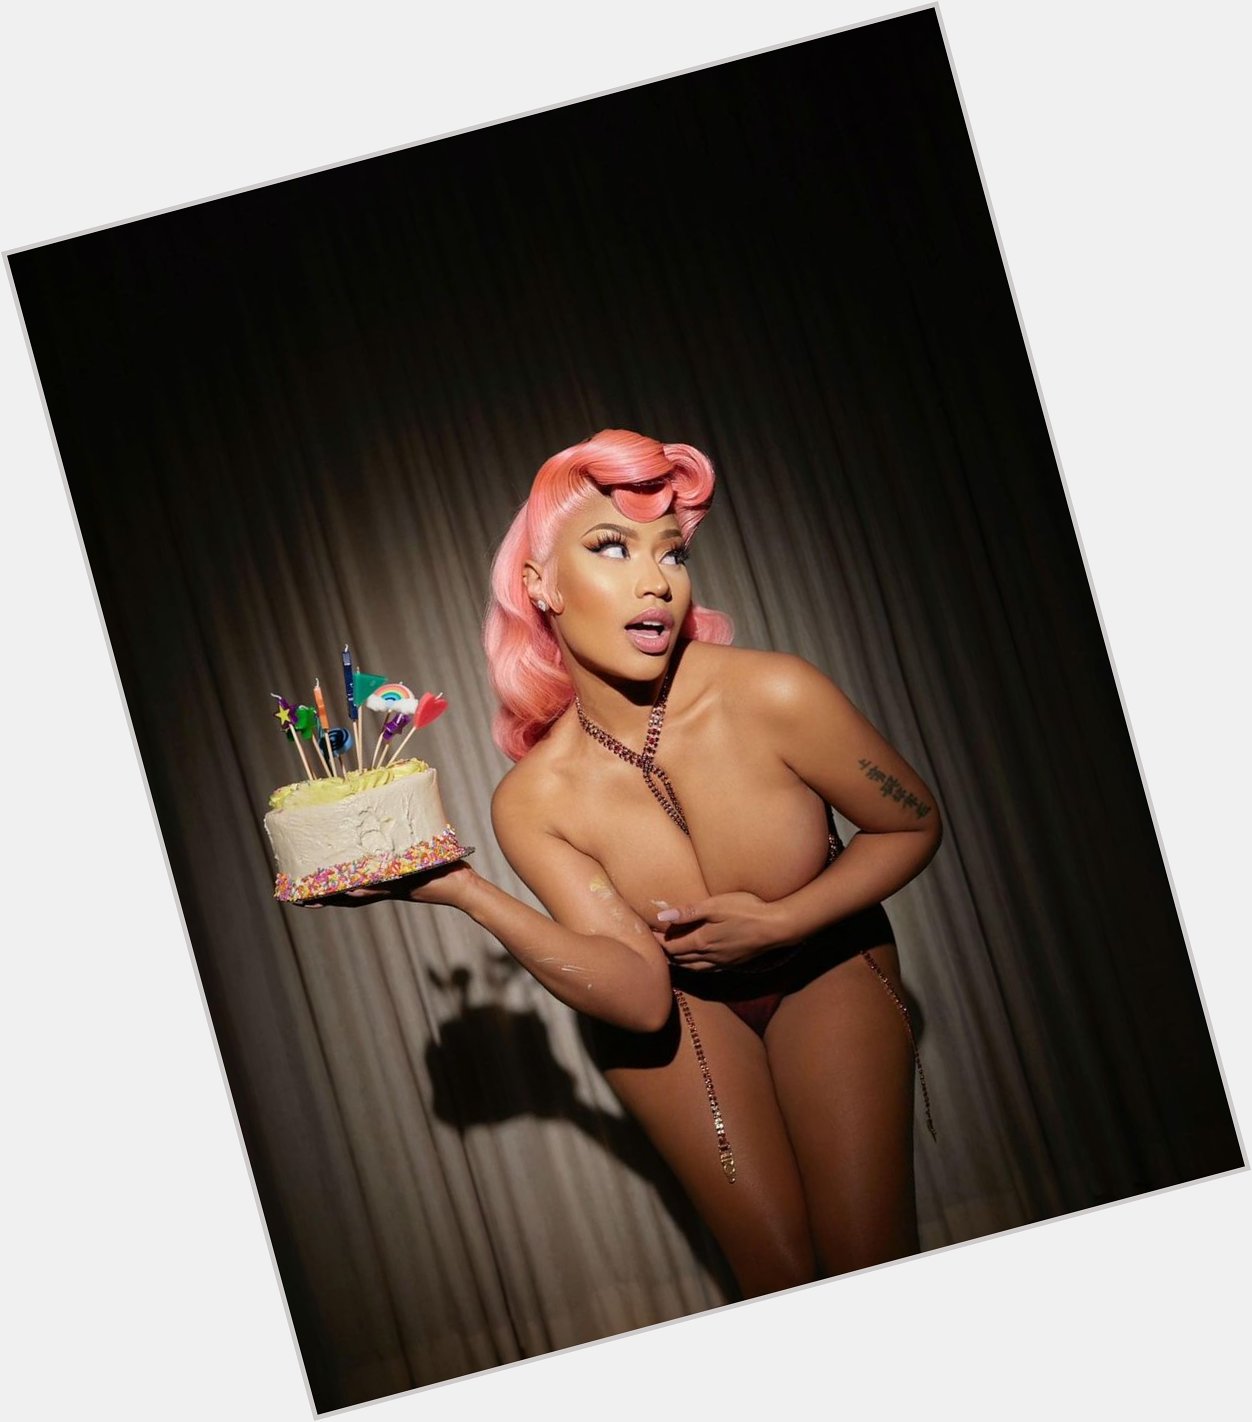 Did y\all wish a Happy Birthday yesterday? Peep her photoshoot:  